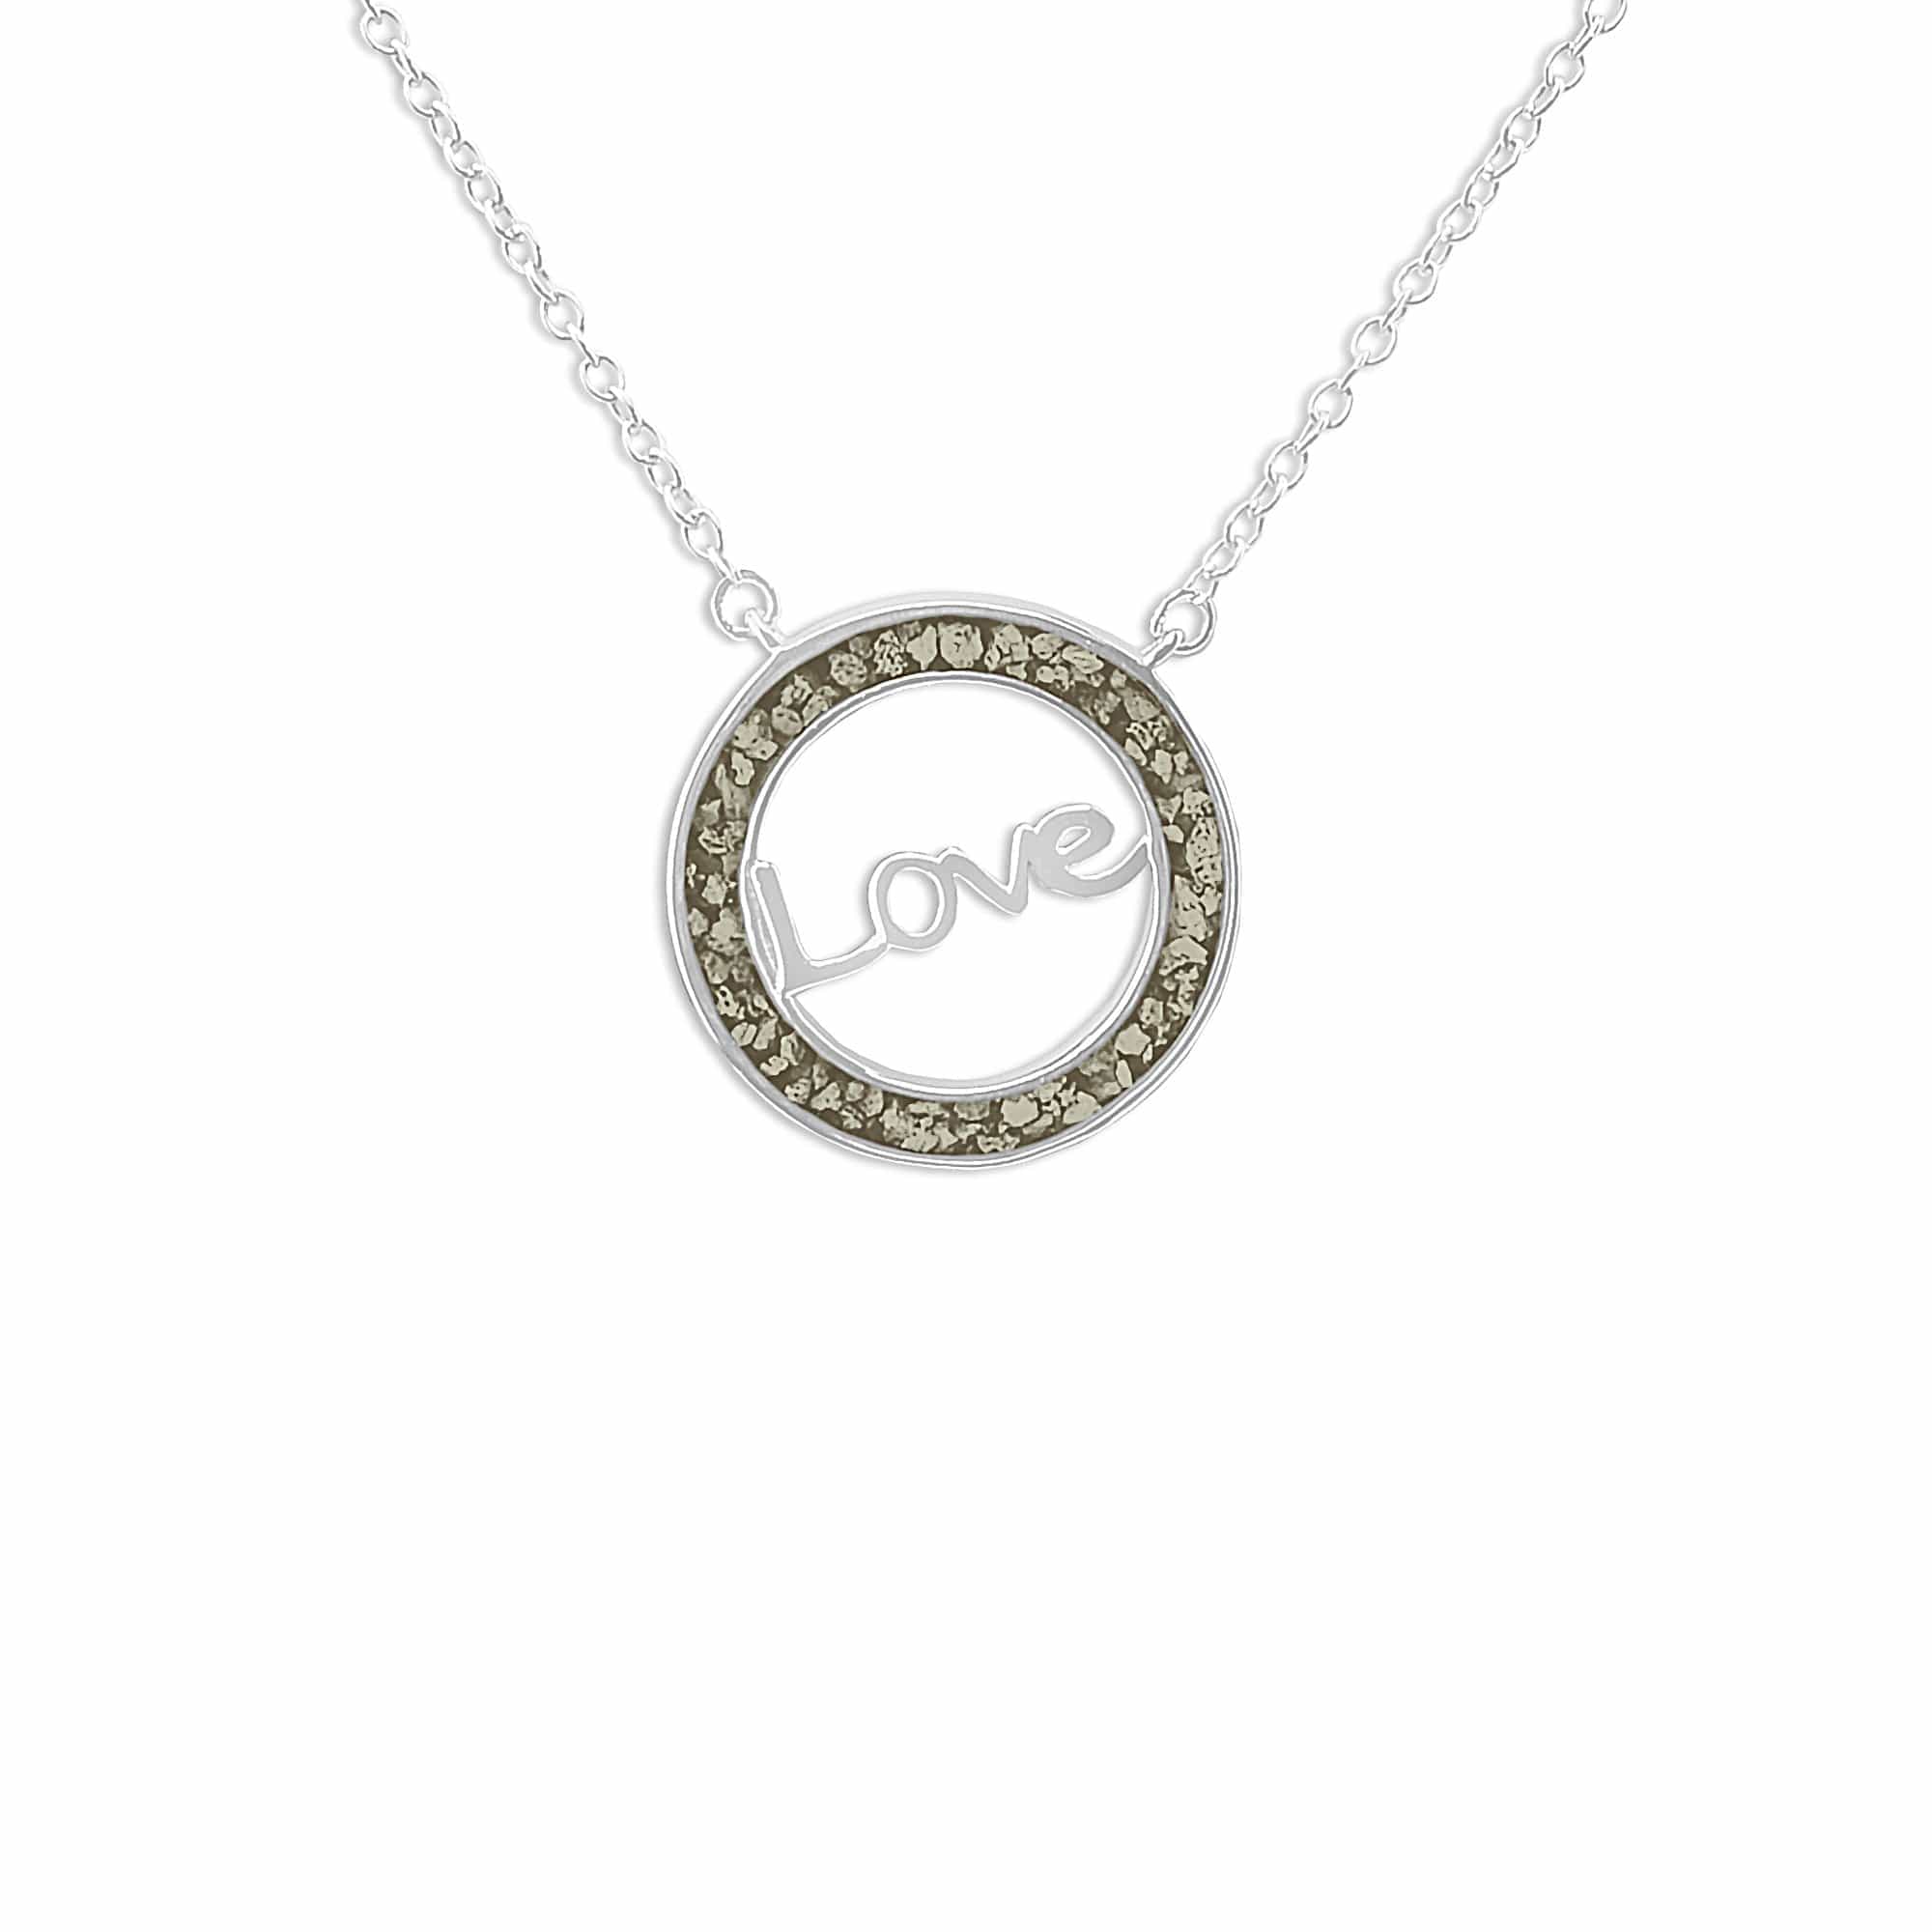 EverWith Ladies Love Memorial Ashes Necklace